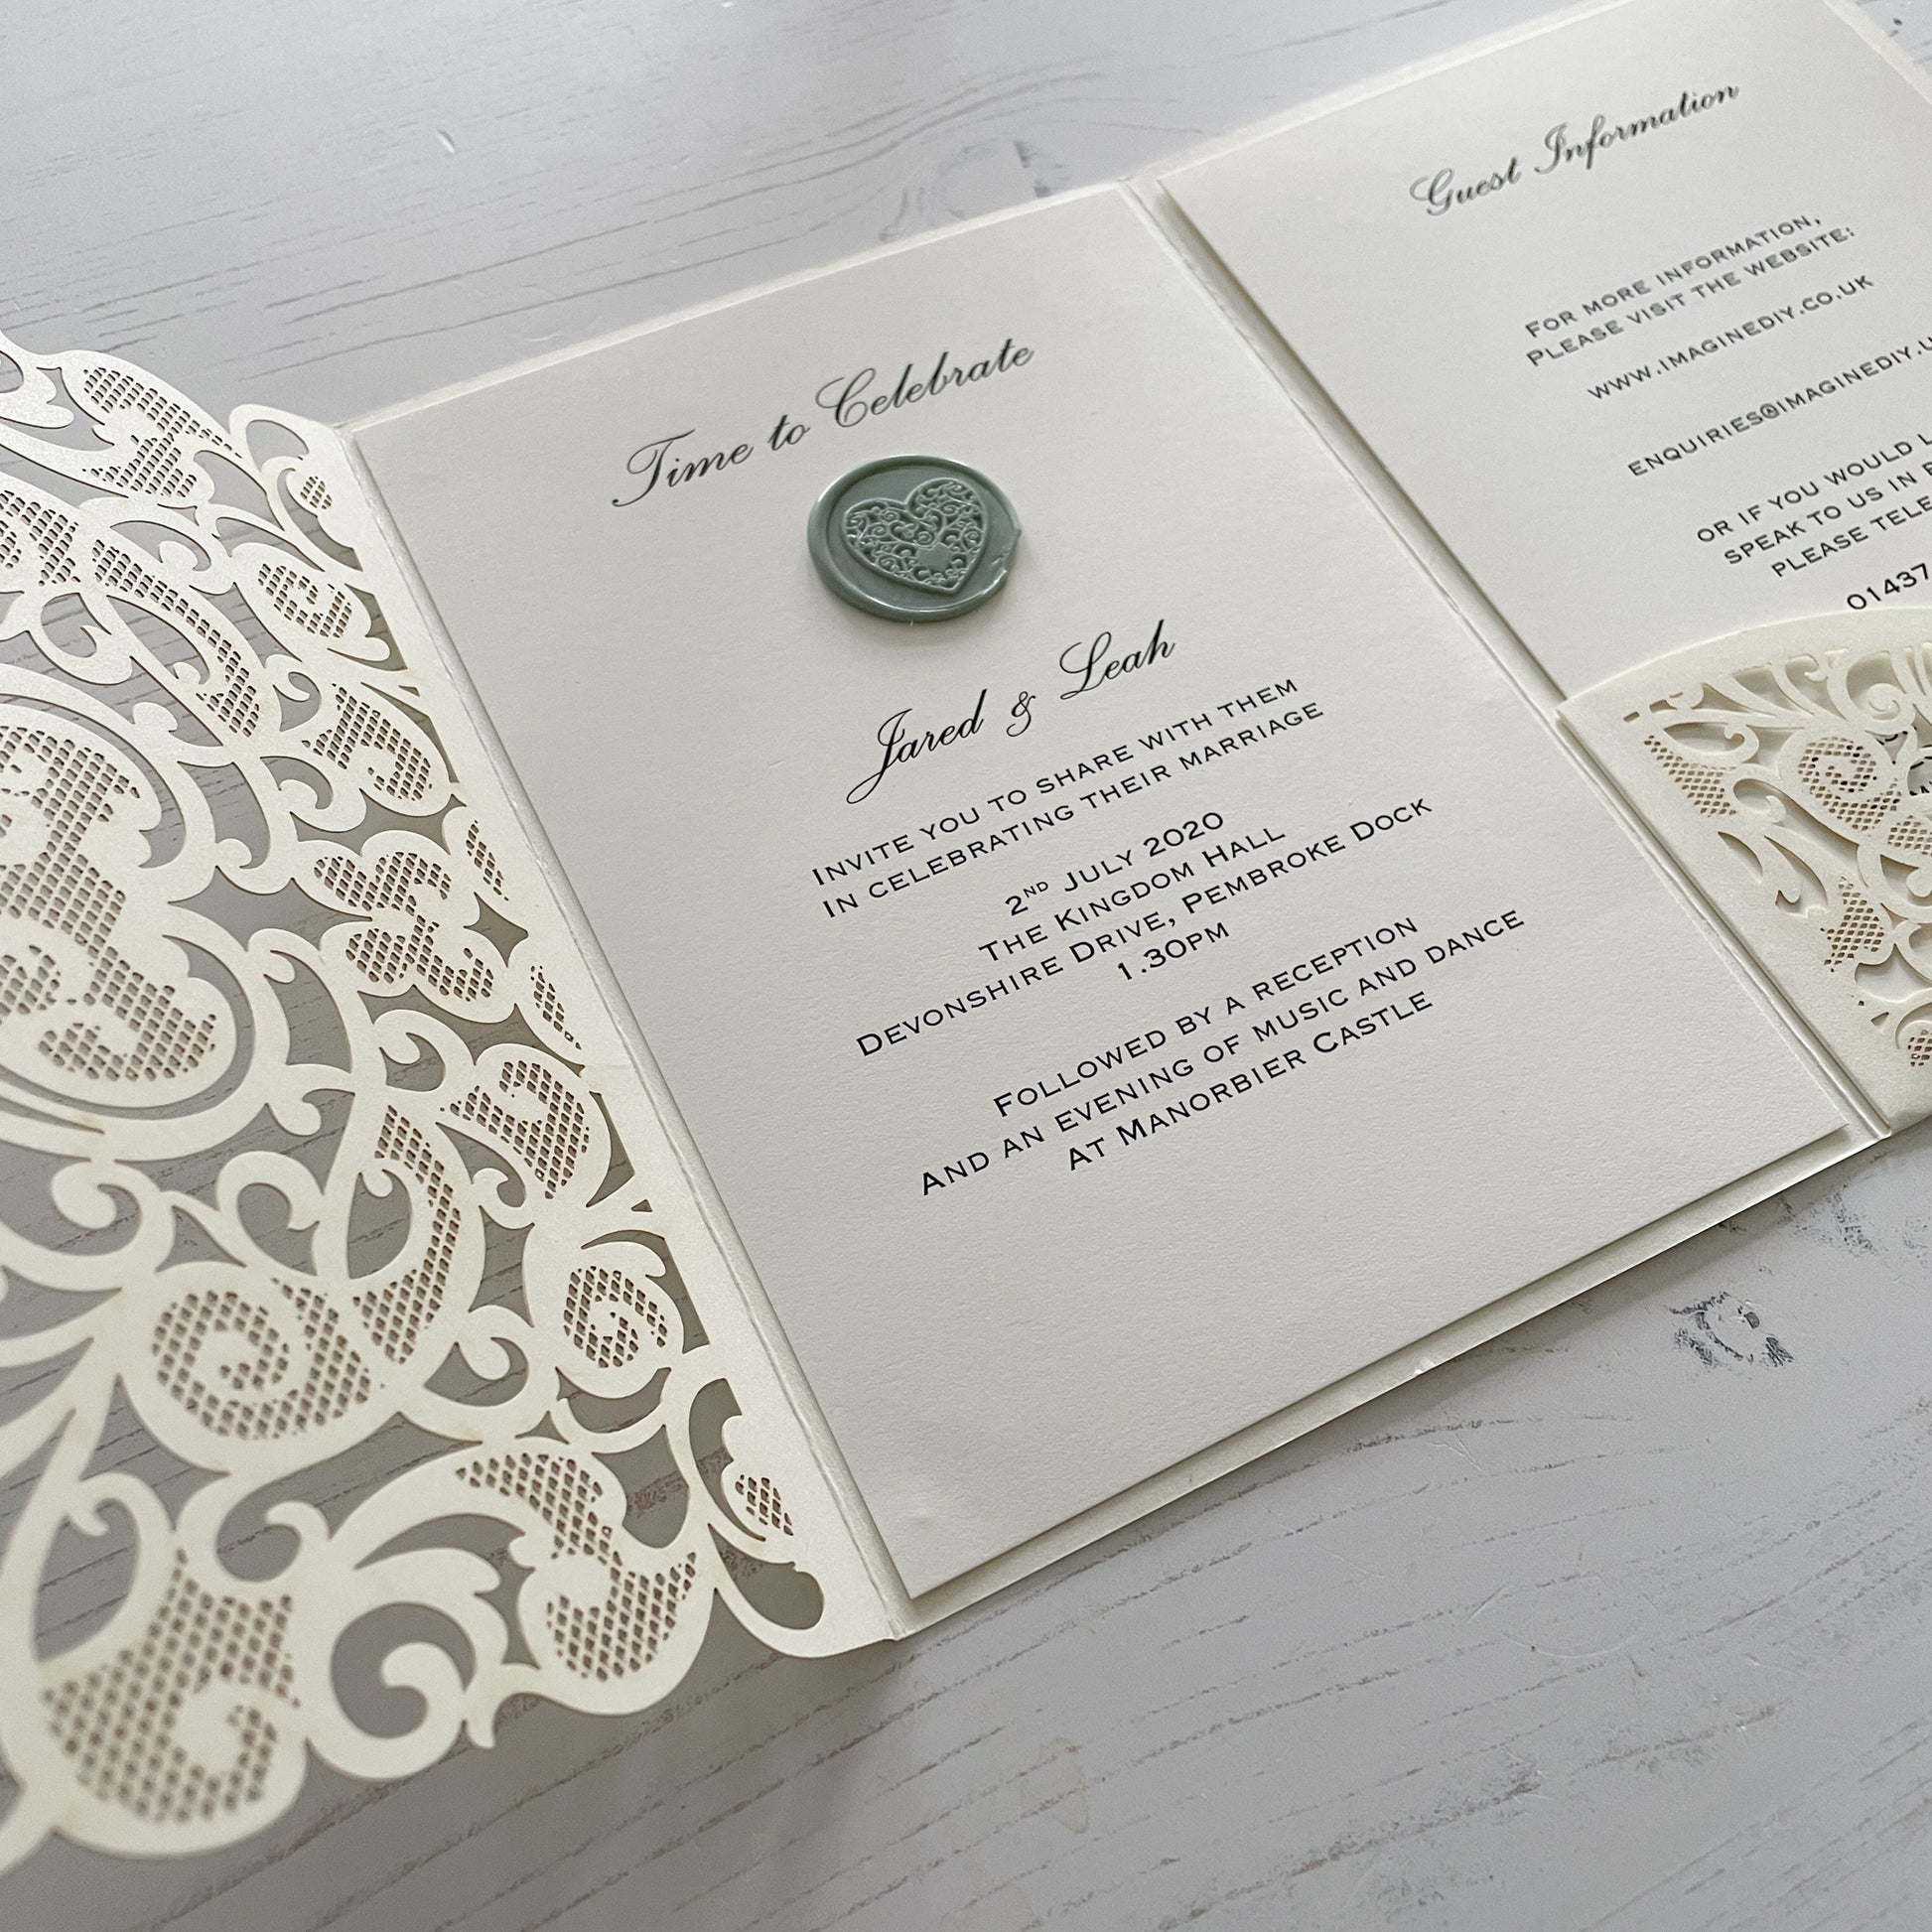 Wedding Invitation in ivory with sage green wax seal.  Wax stamp with heart shape.  